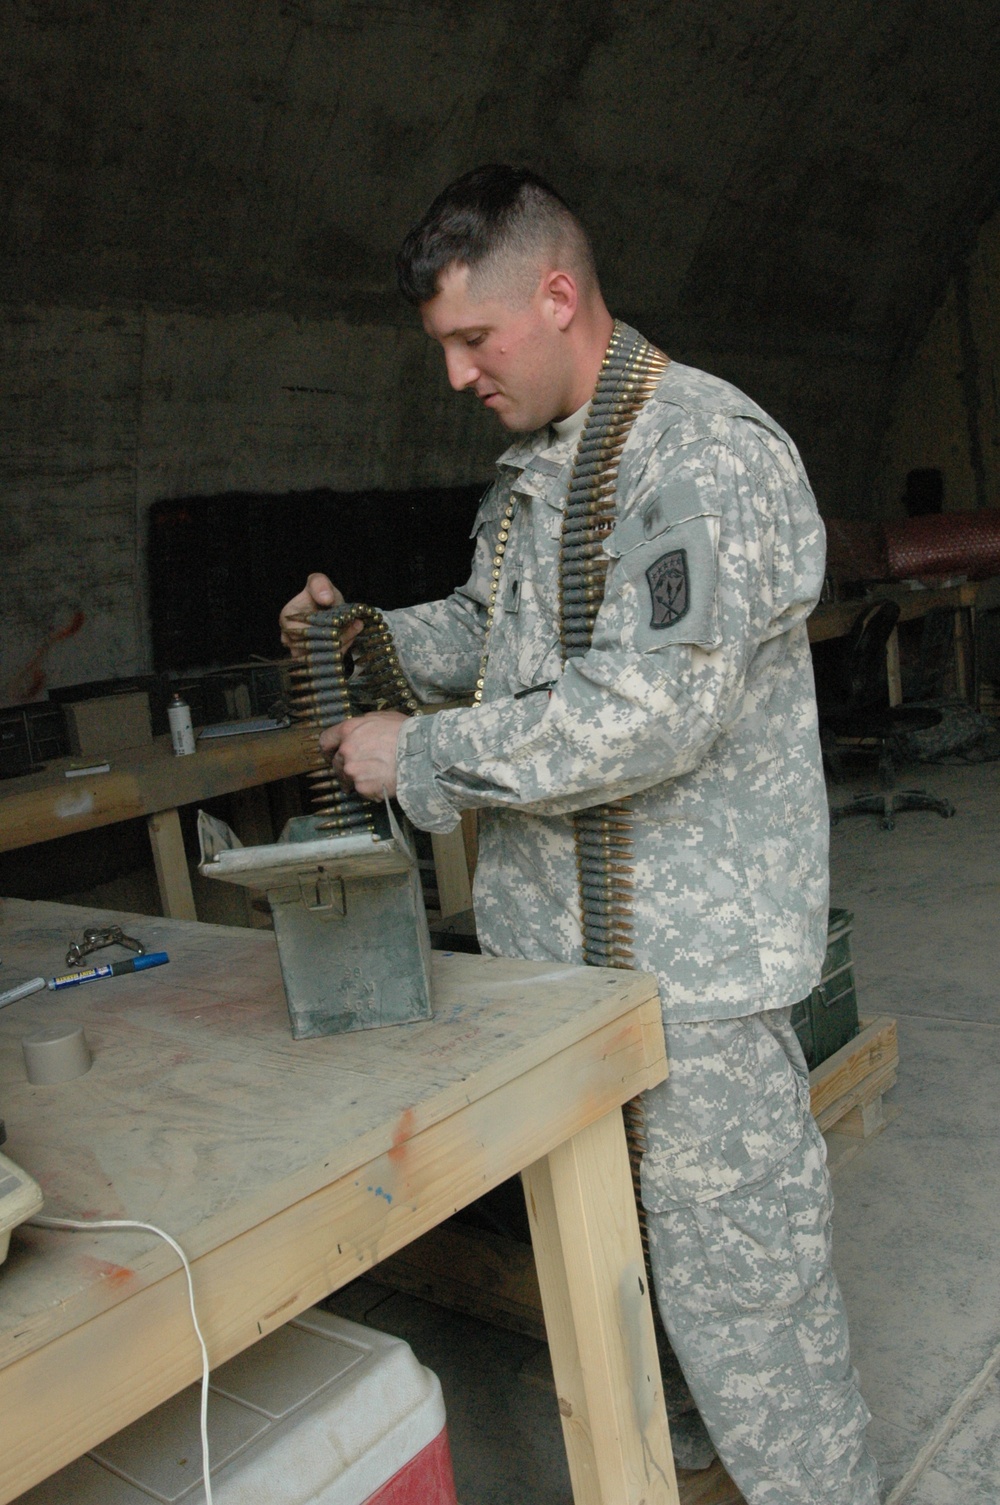 13th Sustainment Command (Expeditionary) ships bullets from Iraq to Afghanistan